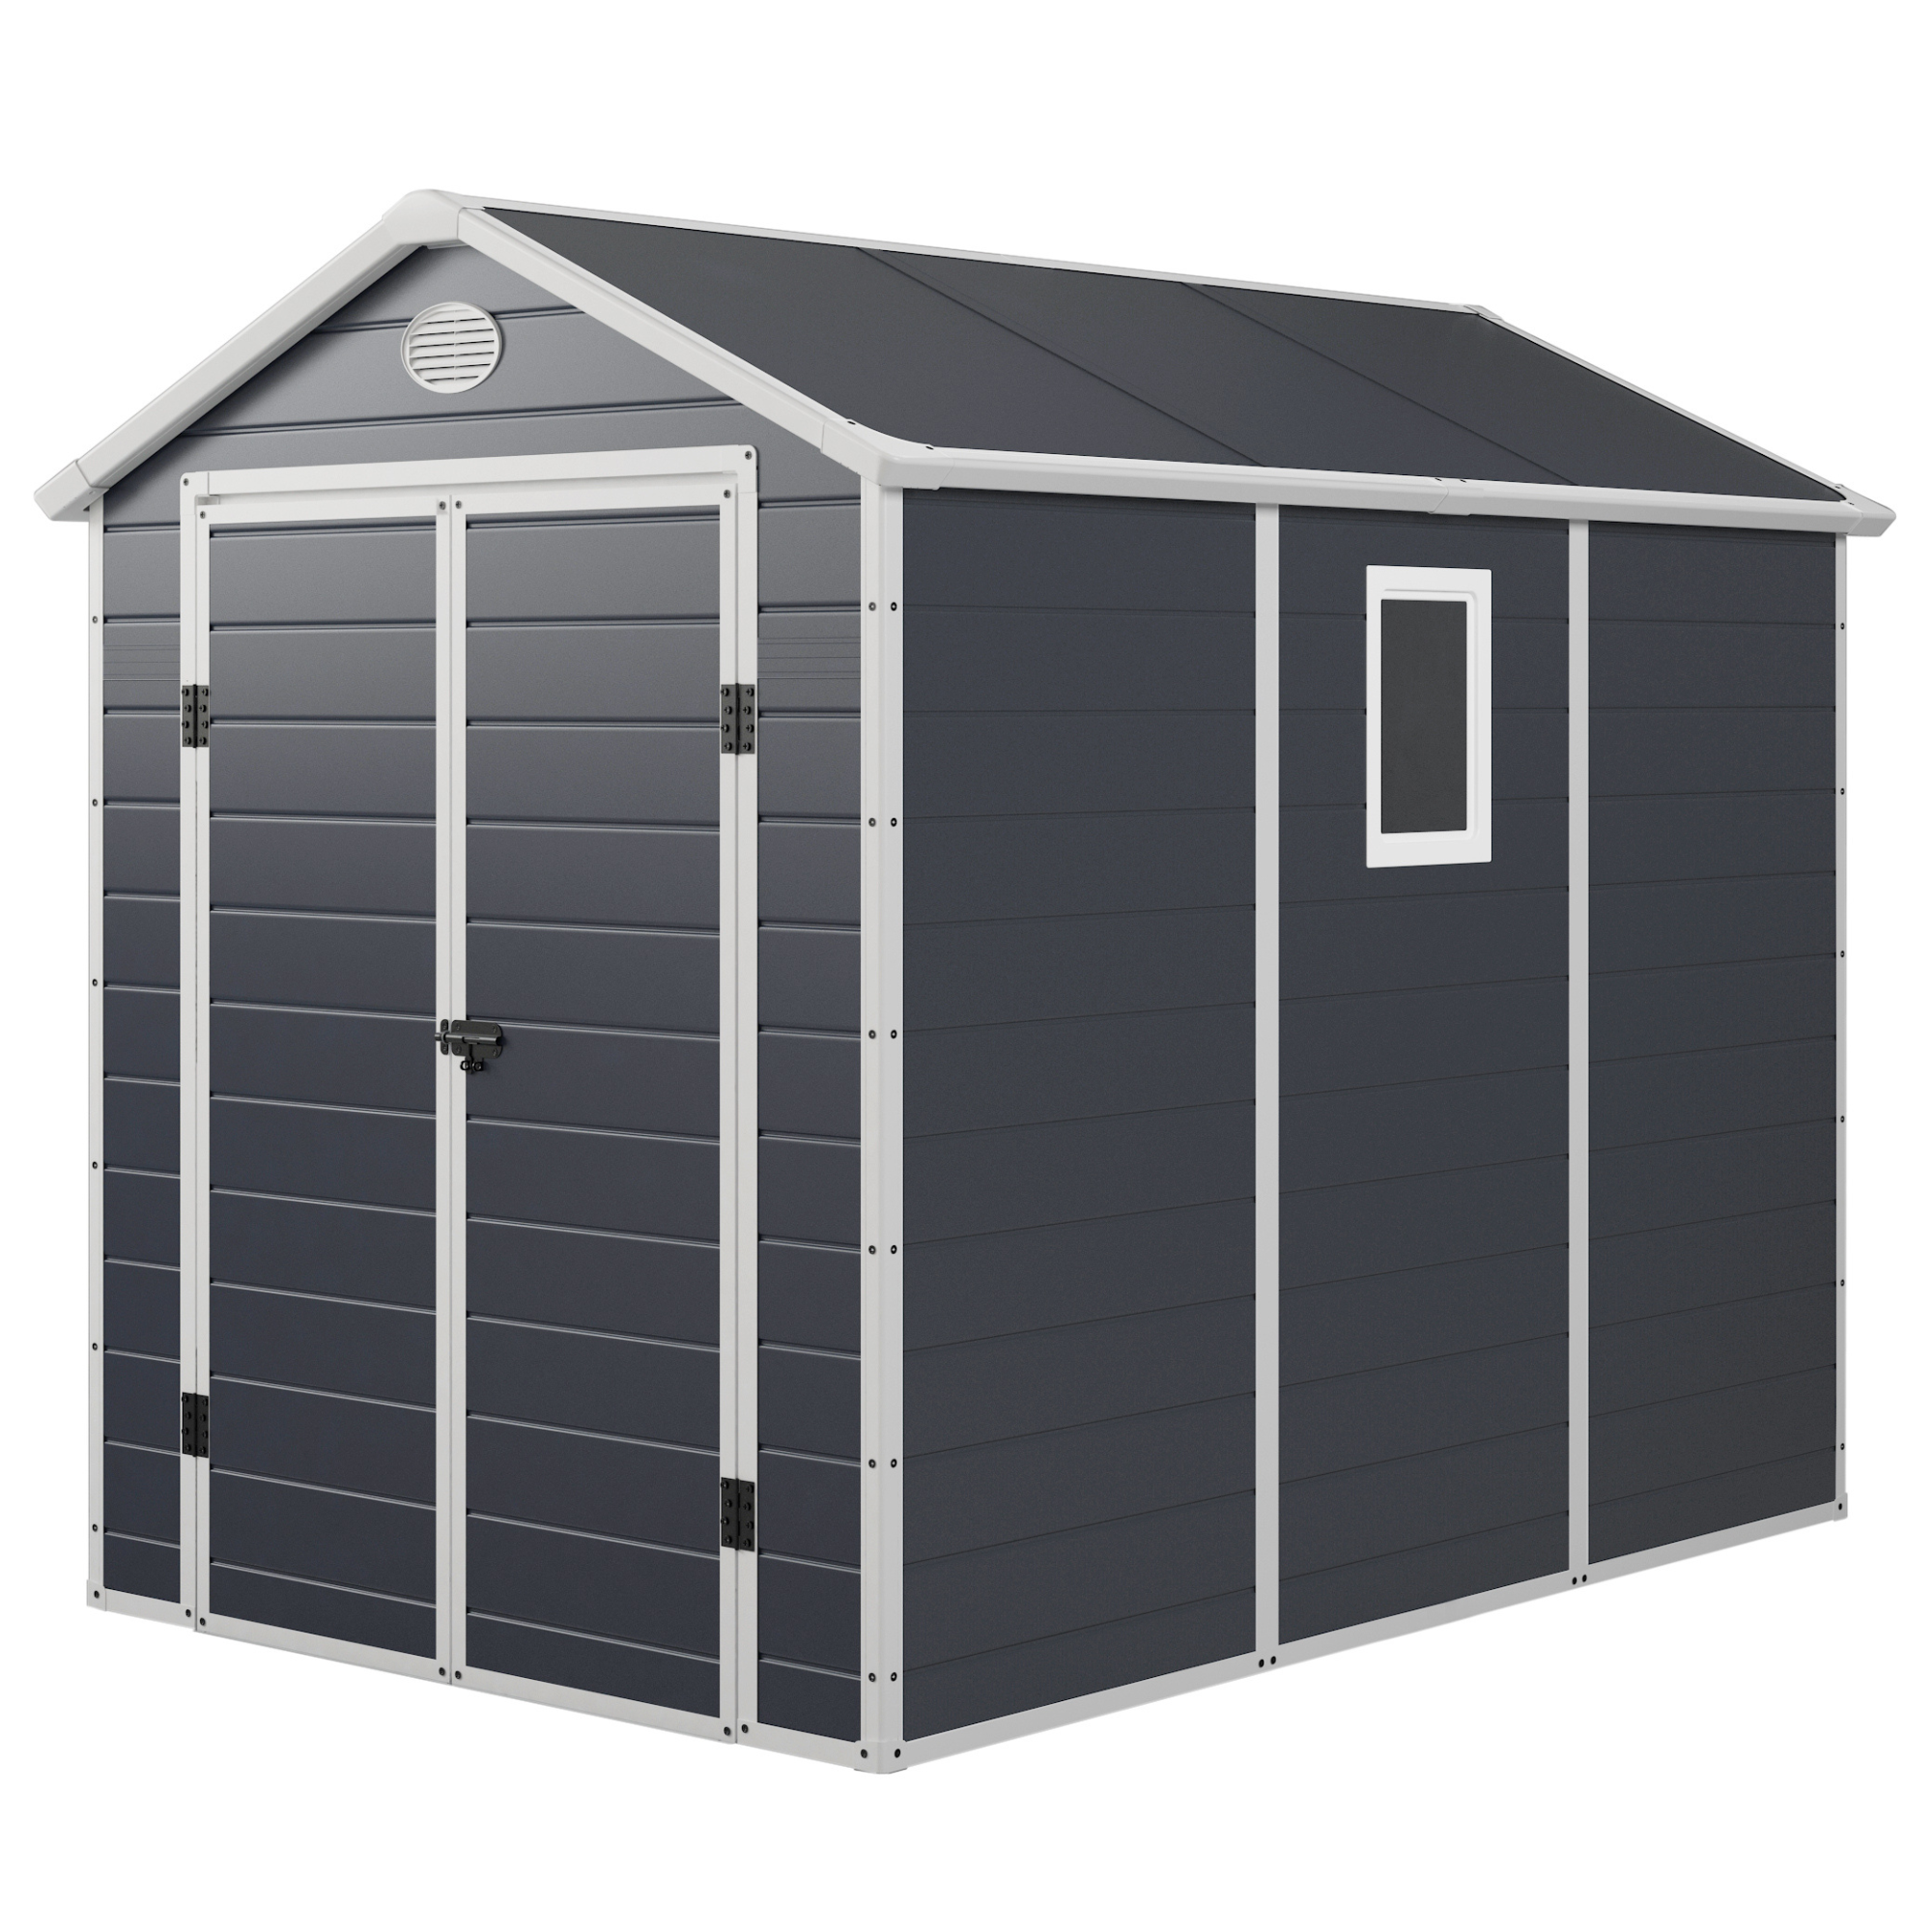 BillyOh Kingston Apex Plastic Shed Light Grey With Floor  - 6x9 Grey